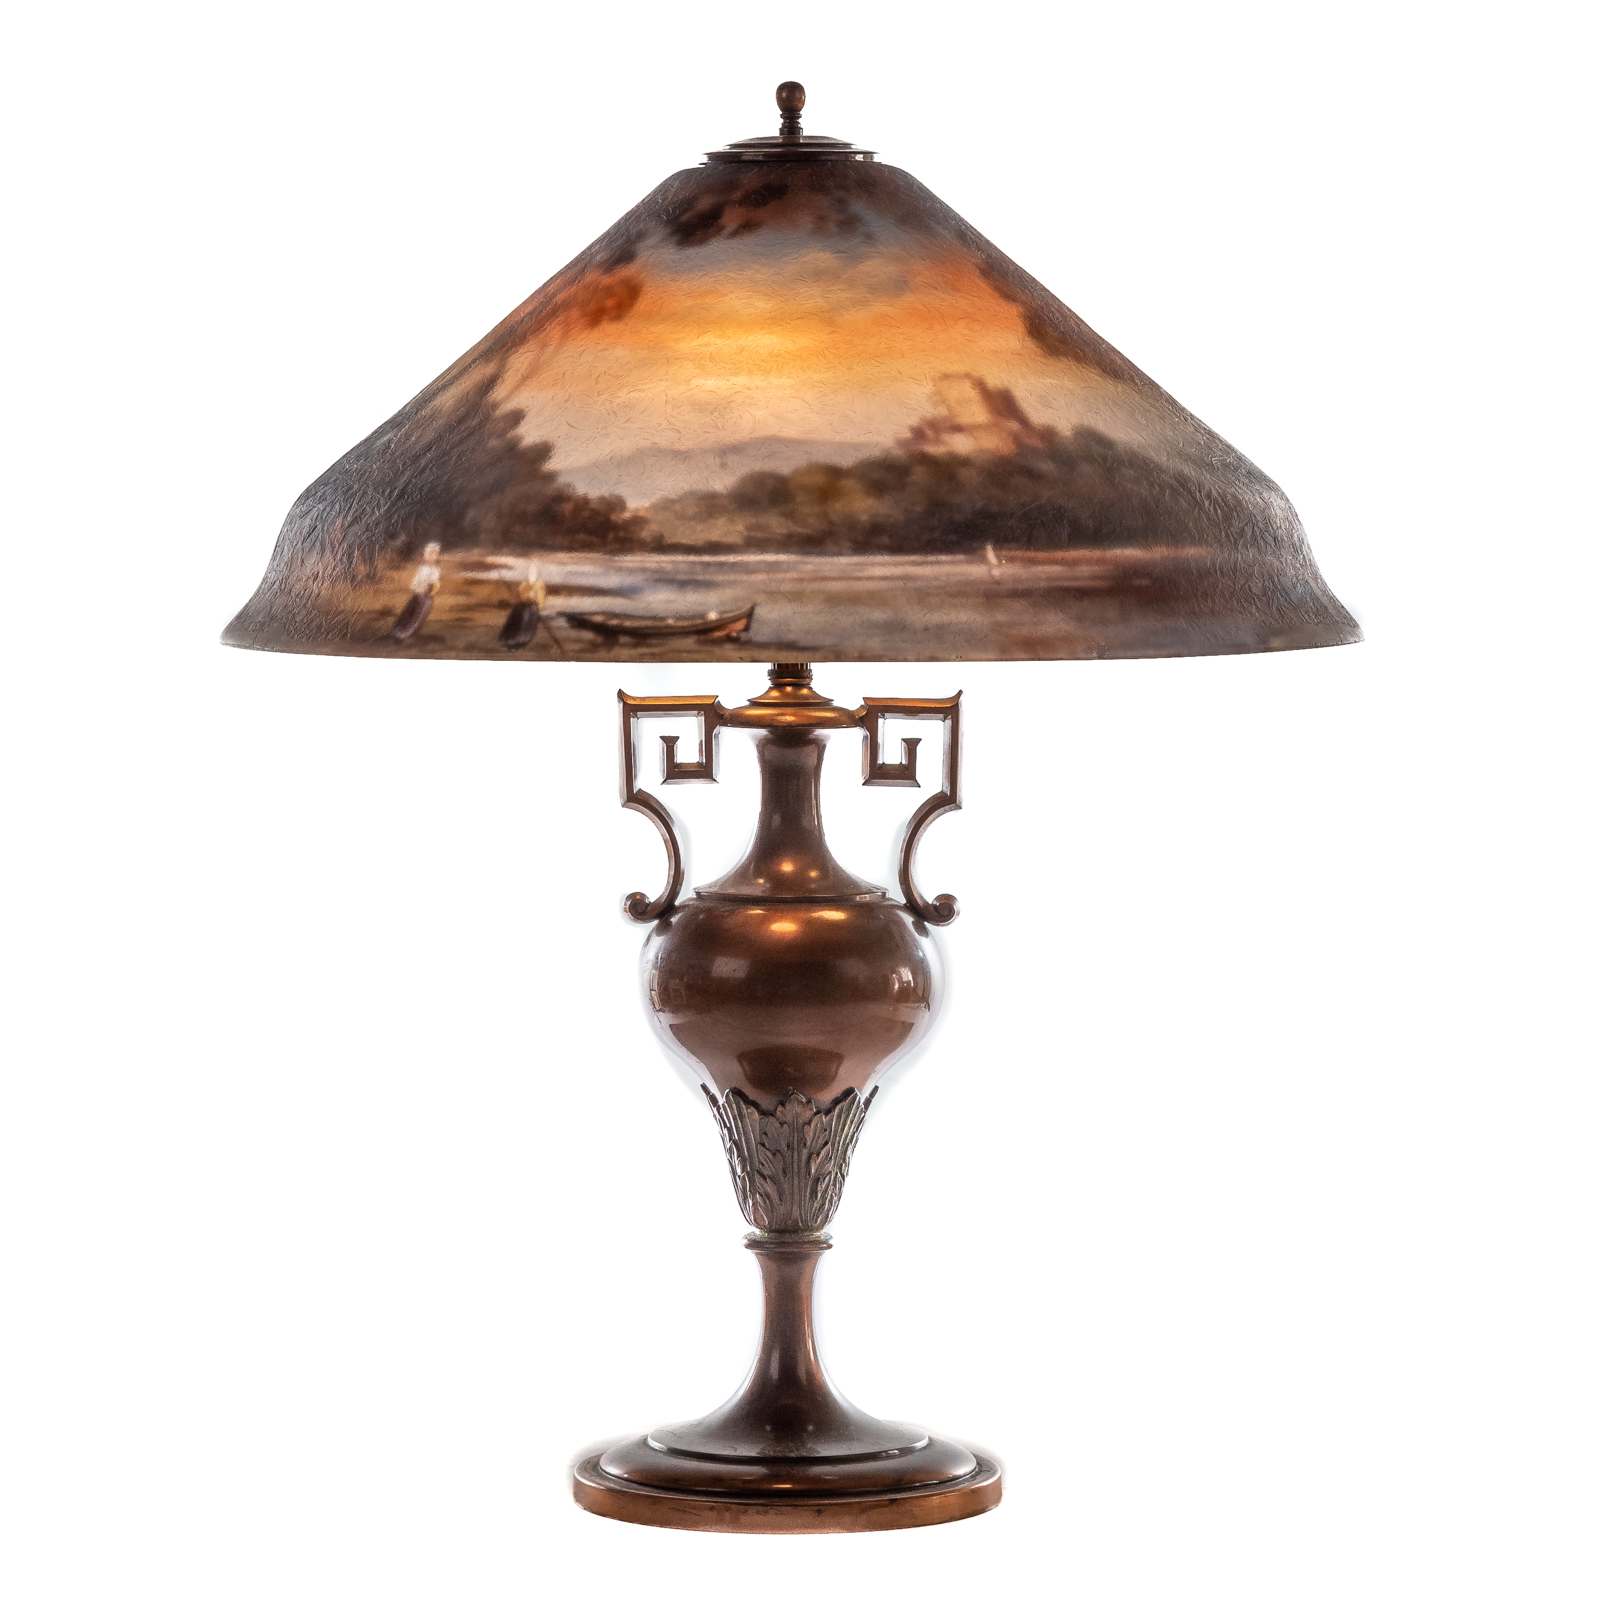 A PAIRPOINT TABLE LAMP REVERSE 288848